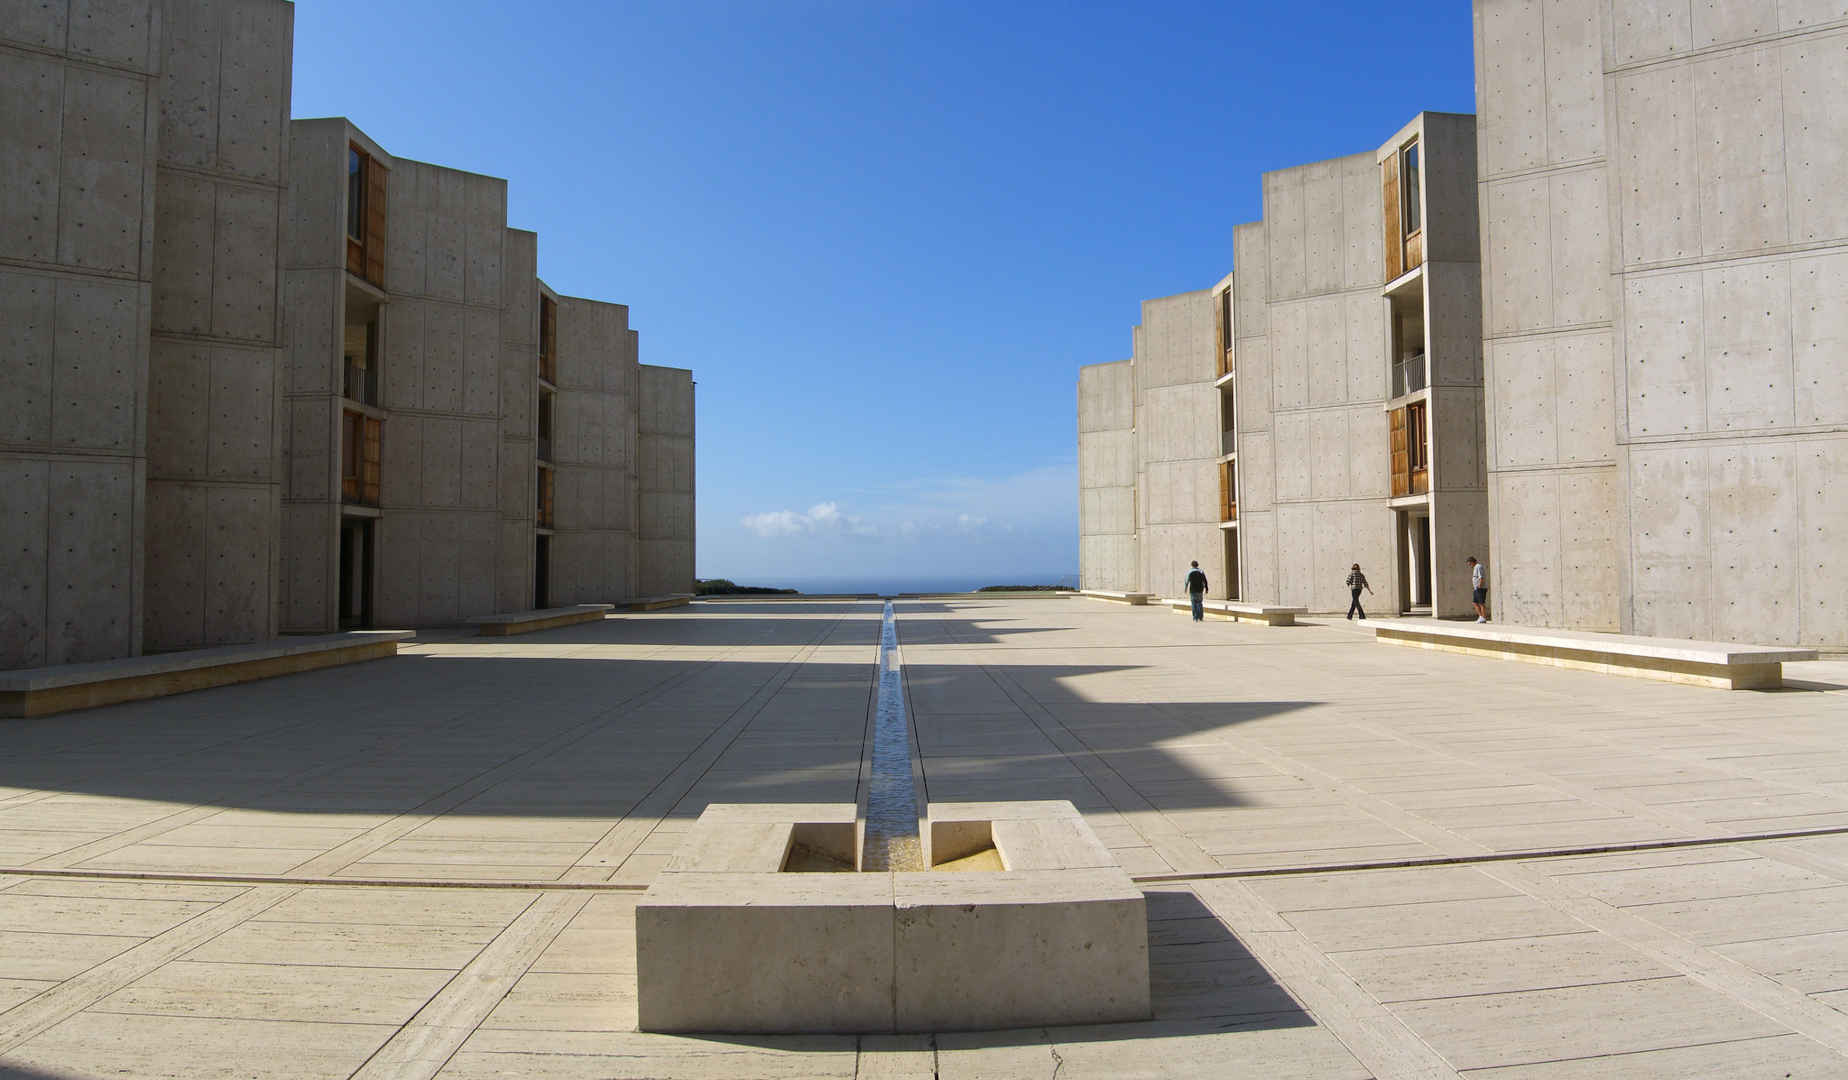 An outdoor pavilion of the Louis Kah’s Salk Institute in La Jolla, Southern California